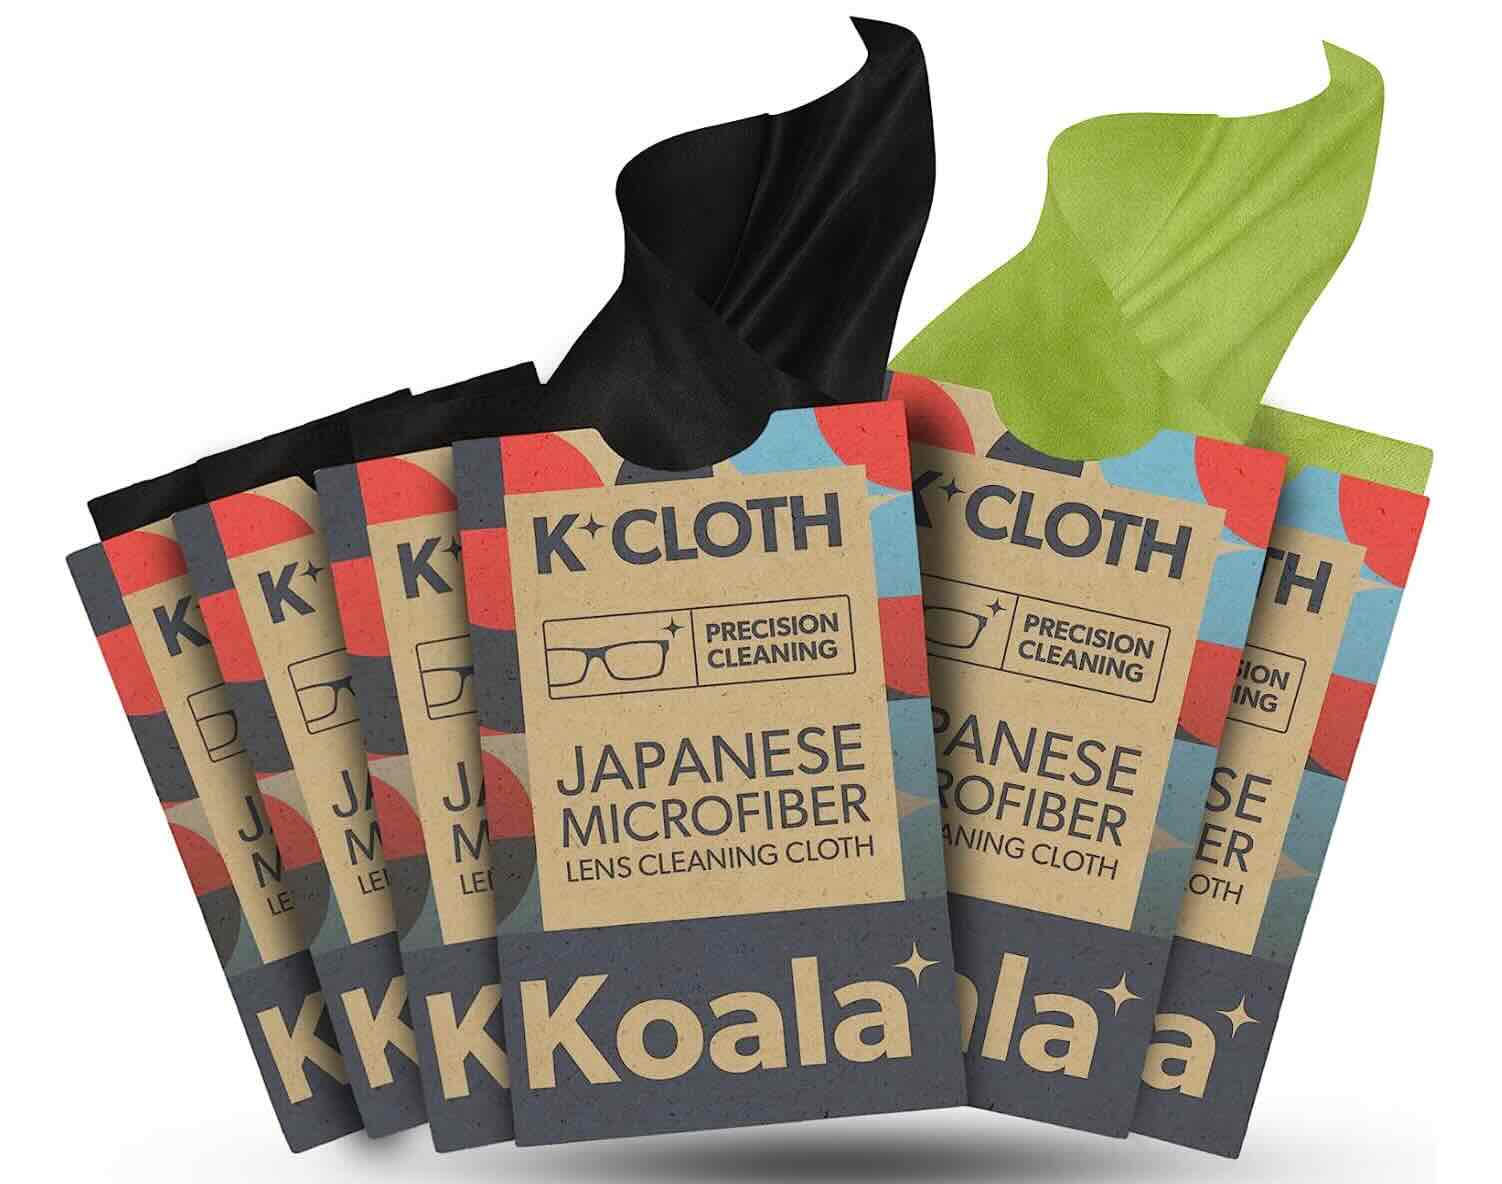 Koala cleaning cloths for iPhone